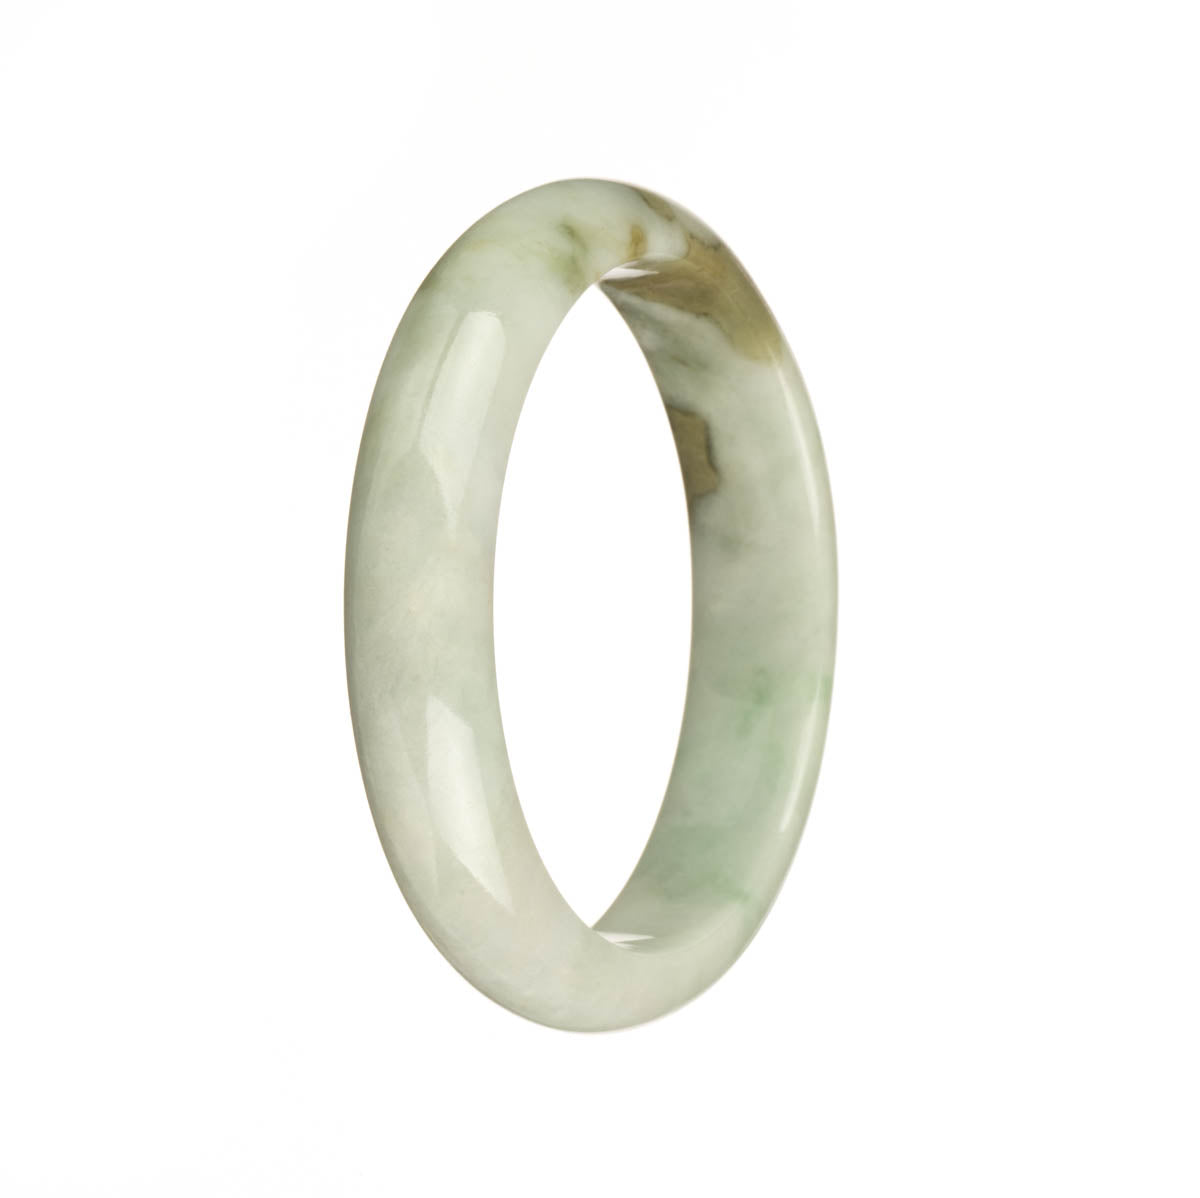 A close-up image of a unique jade bangle bracelet. The bracelet is made of genuine Grade A white jade with intricate green and brown patterns. It has a 54mm diameter and a half-moon shape. The brand name "MAYS" is engraved on the inside of the bracelet.